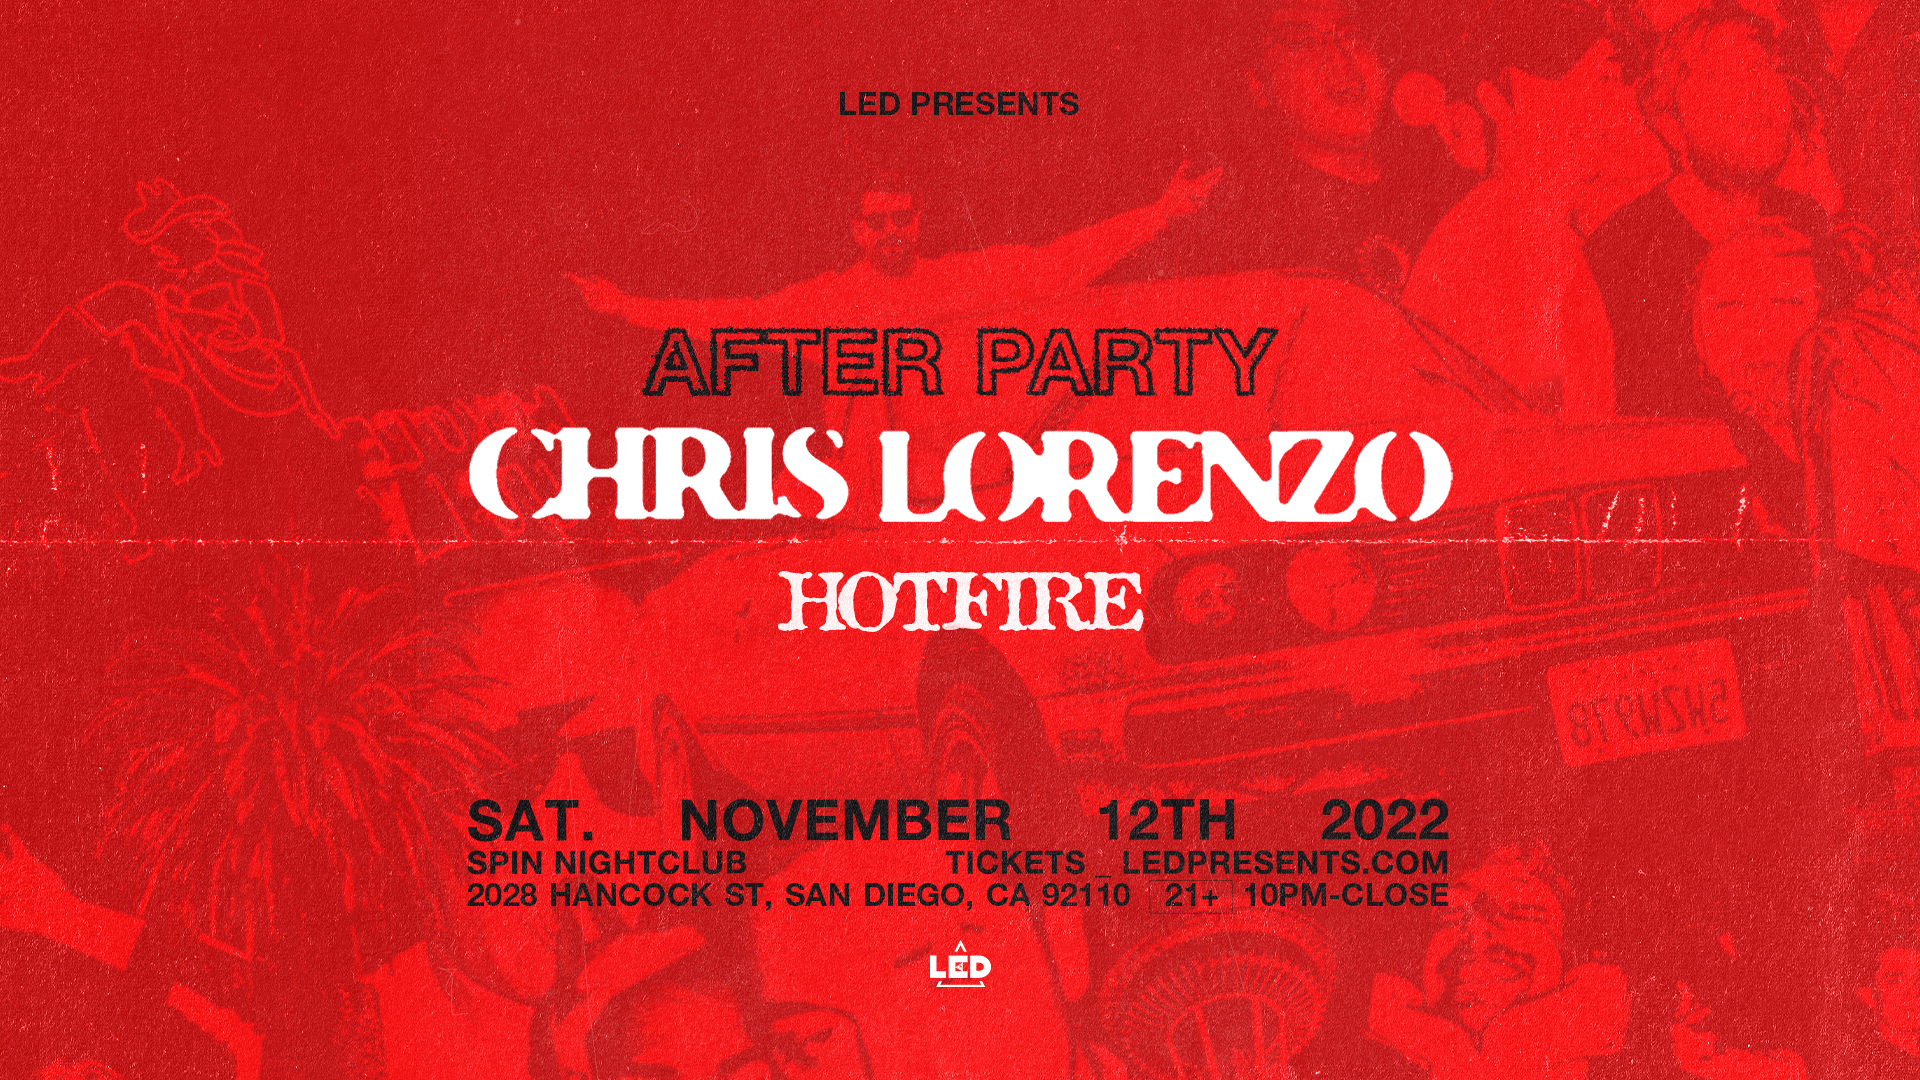 Chris Lorenzo (After Party)